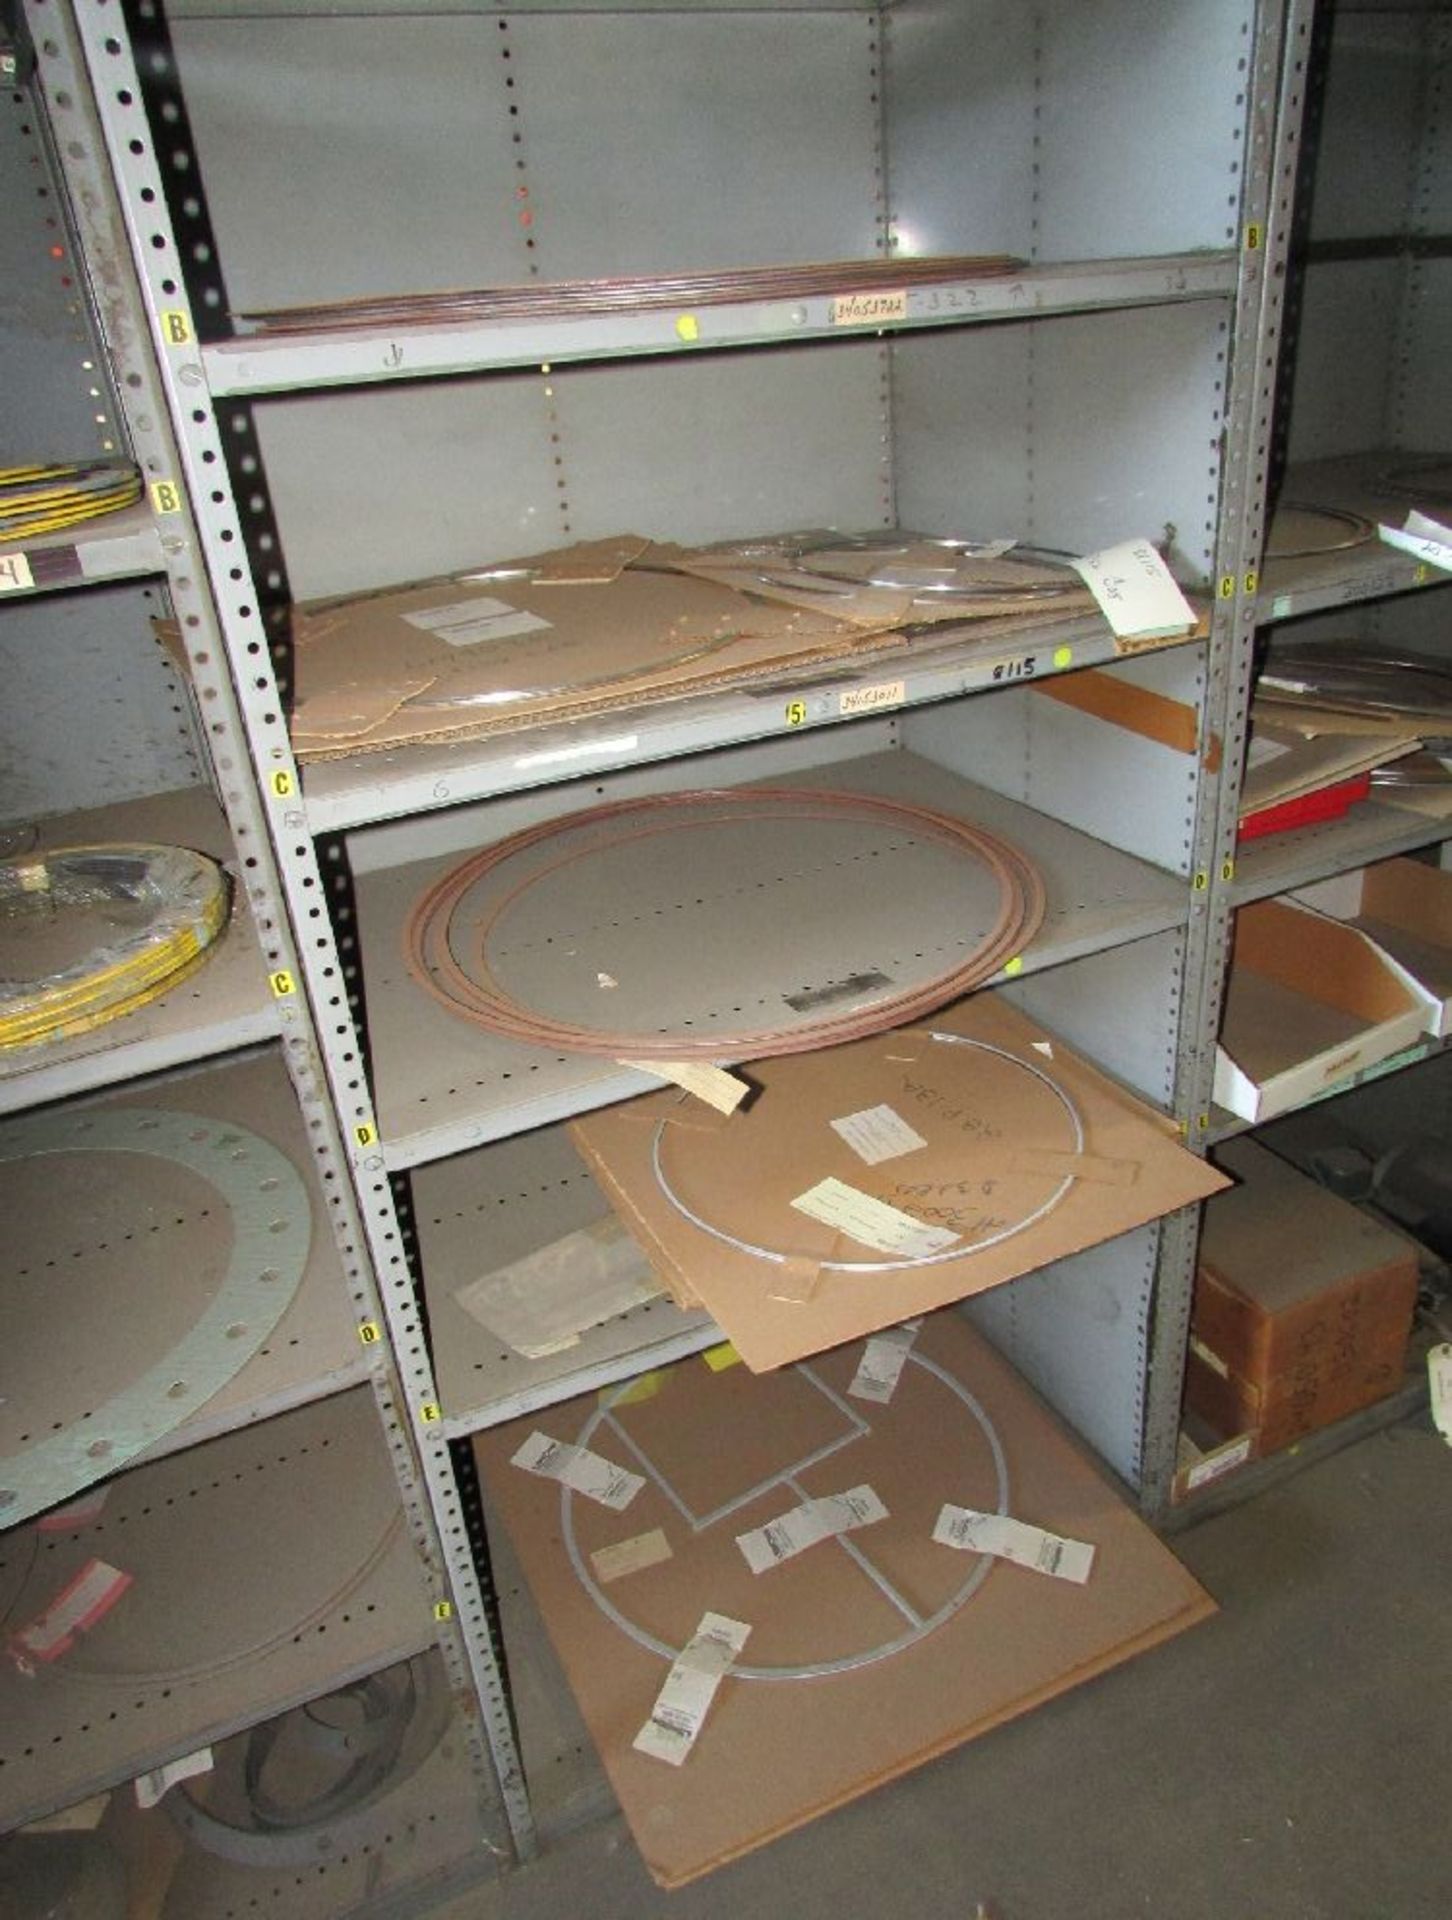 Lot of Large Assortment of Misc. Compressor, Turbine, and Pump Spare Parts - Image 28 of 36